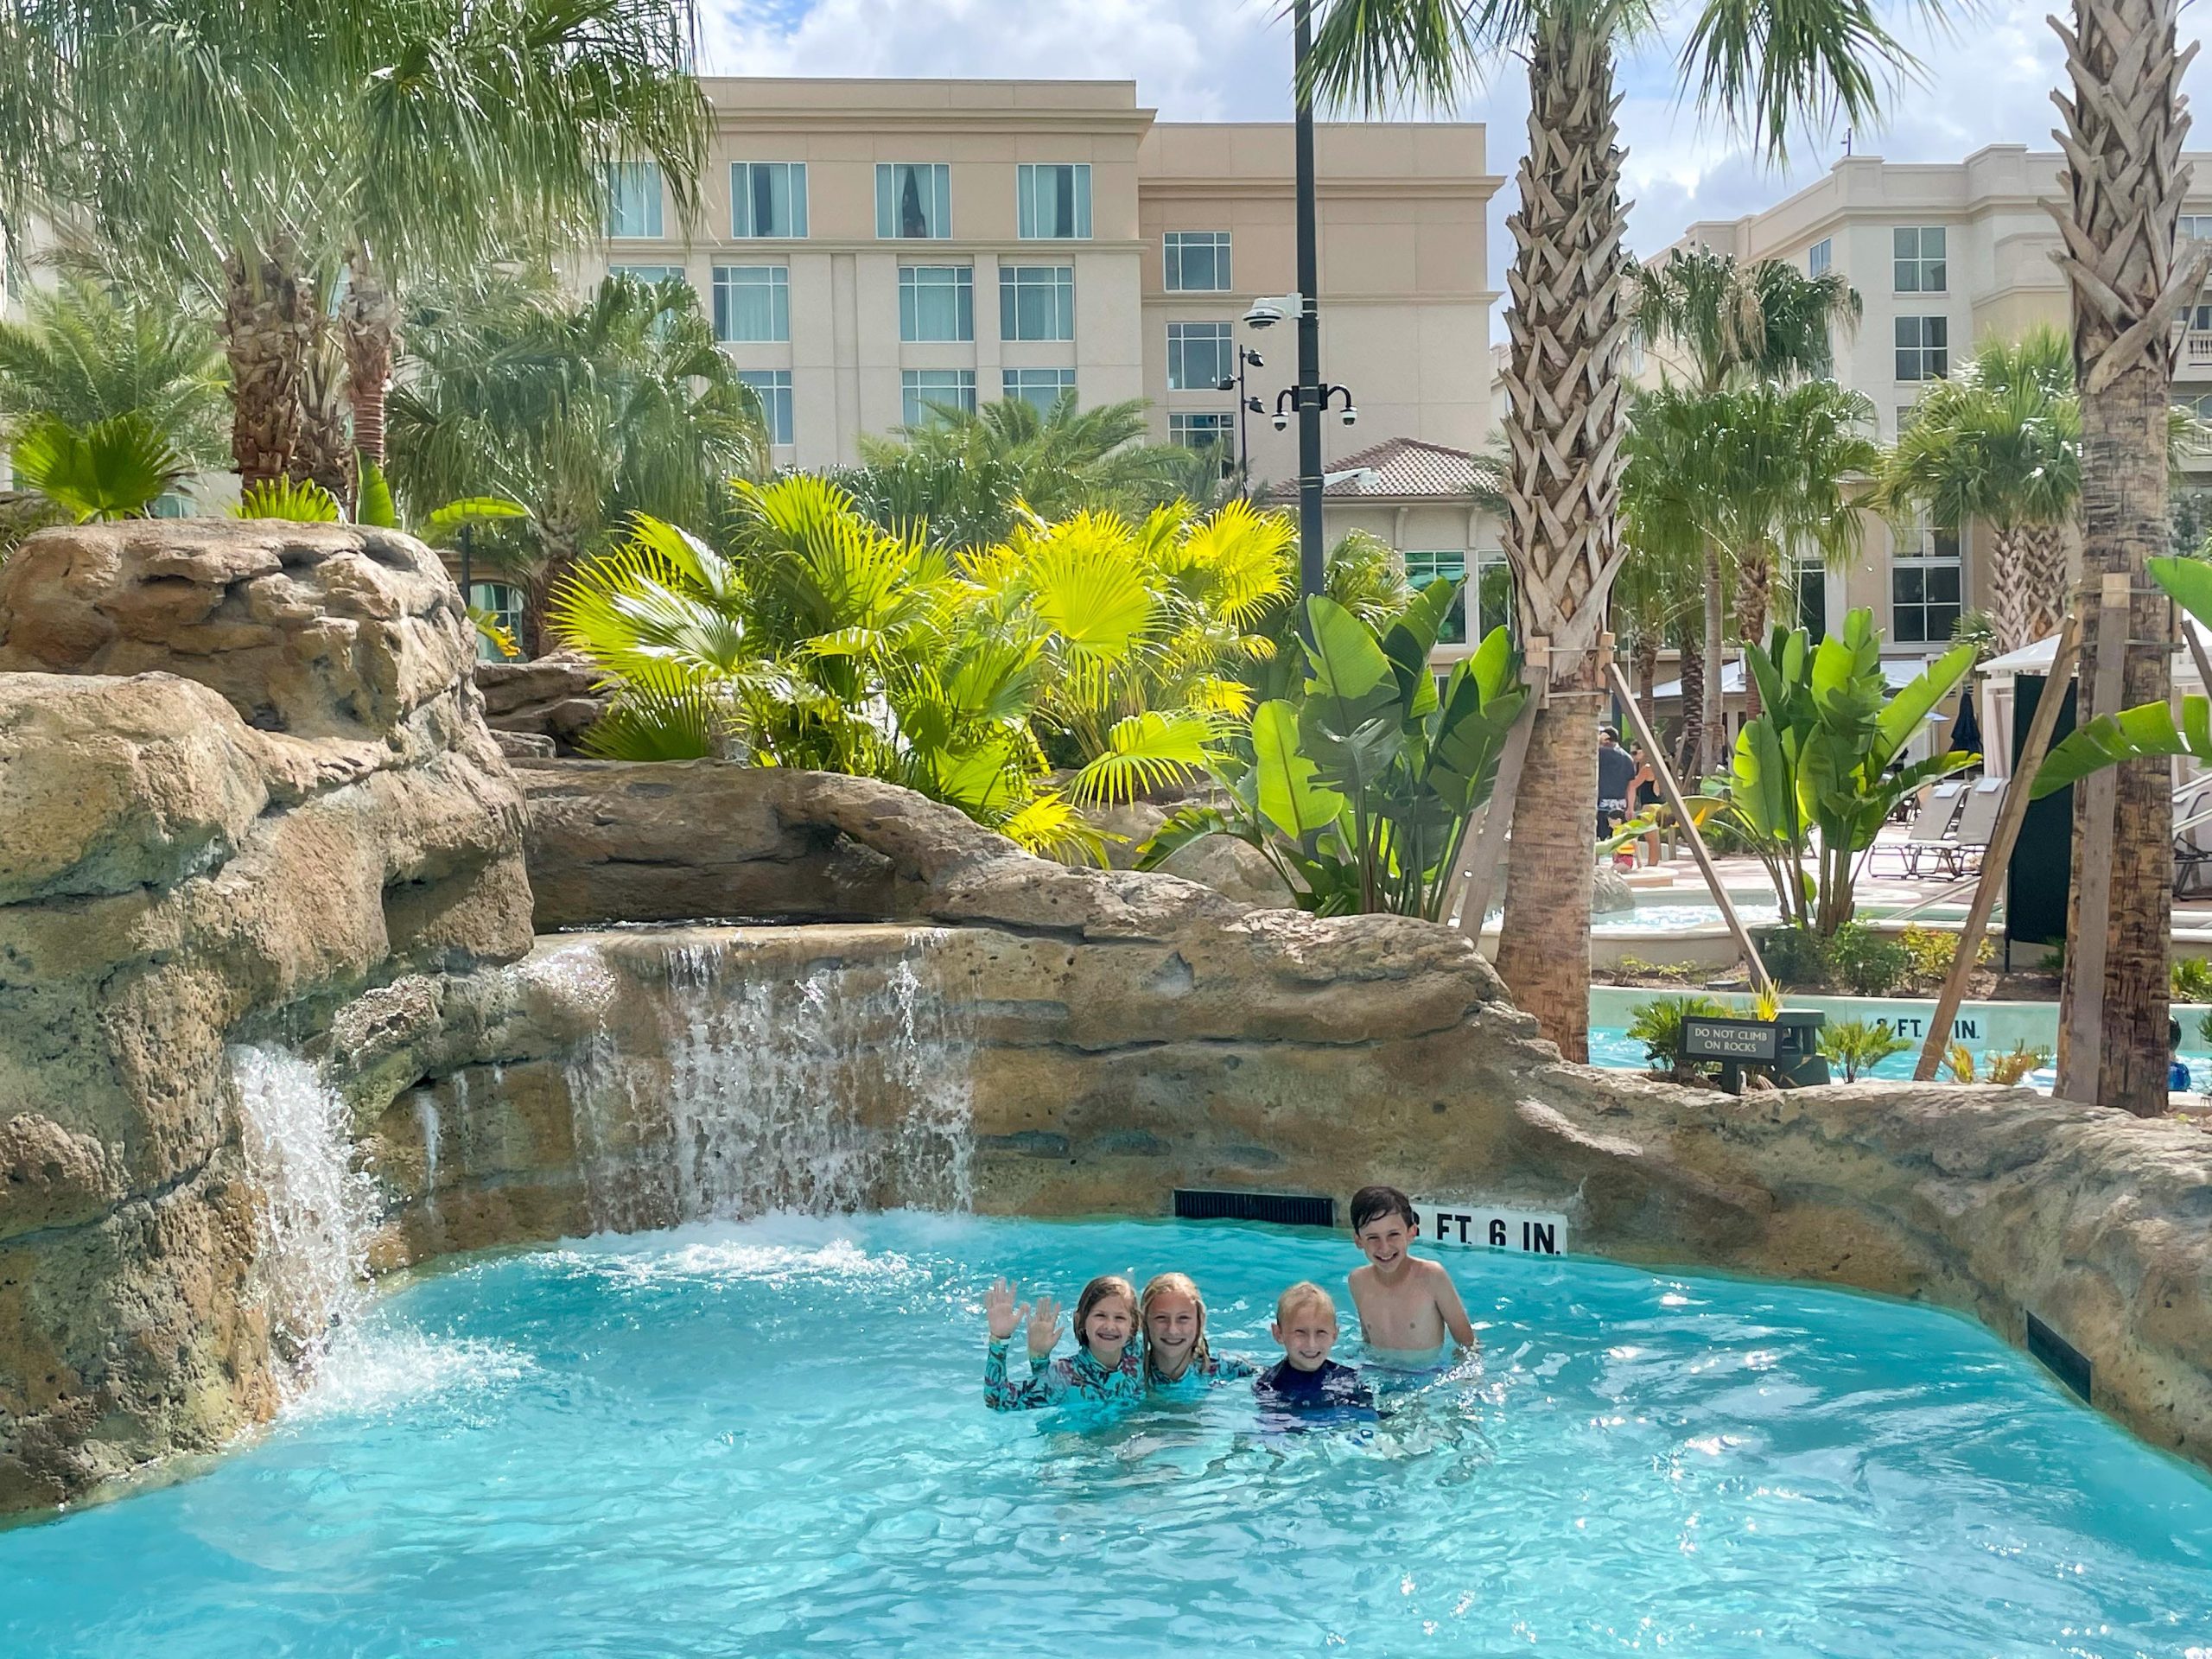 Gaylord Palms Resort Summer of More